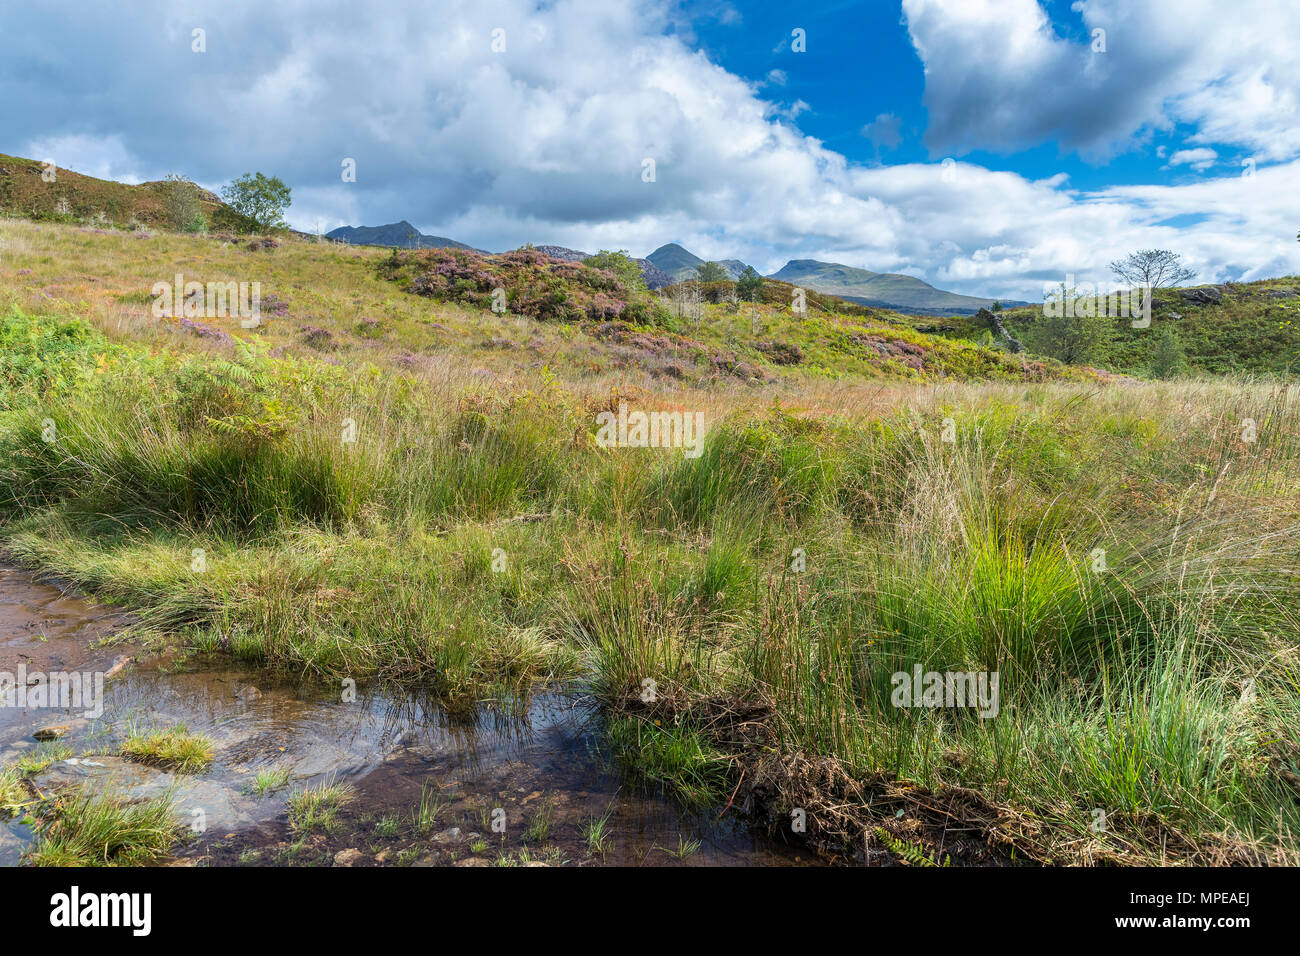 Cwm Parc High Resolution Stock Photography and Images - Alamy